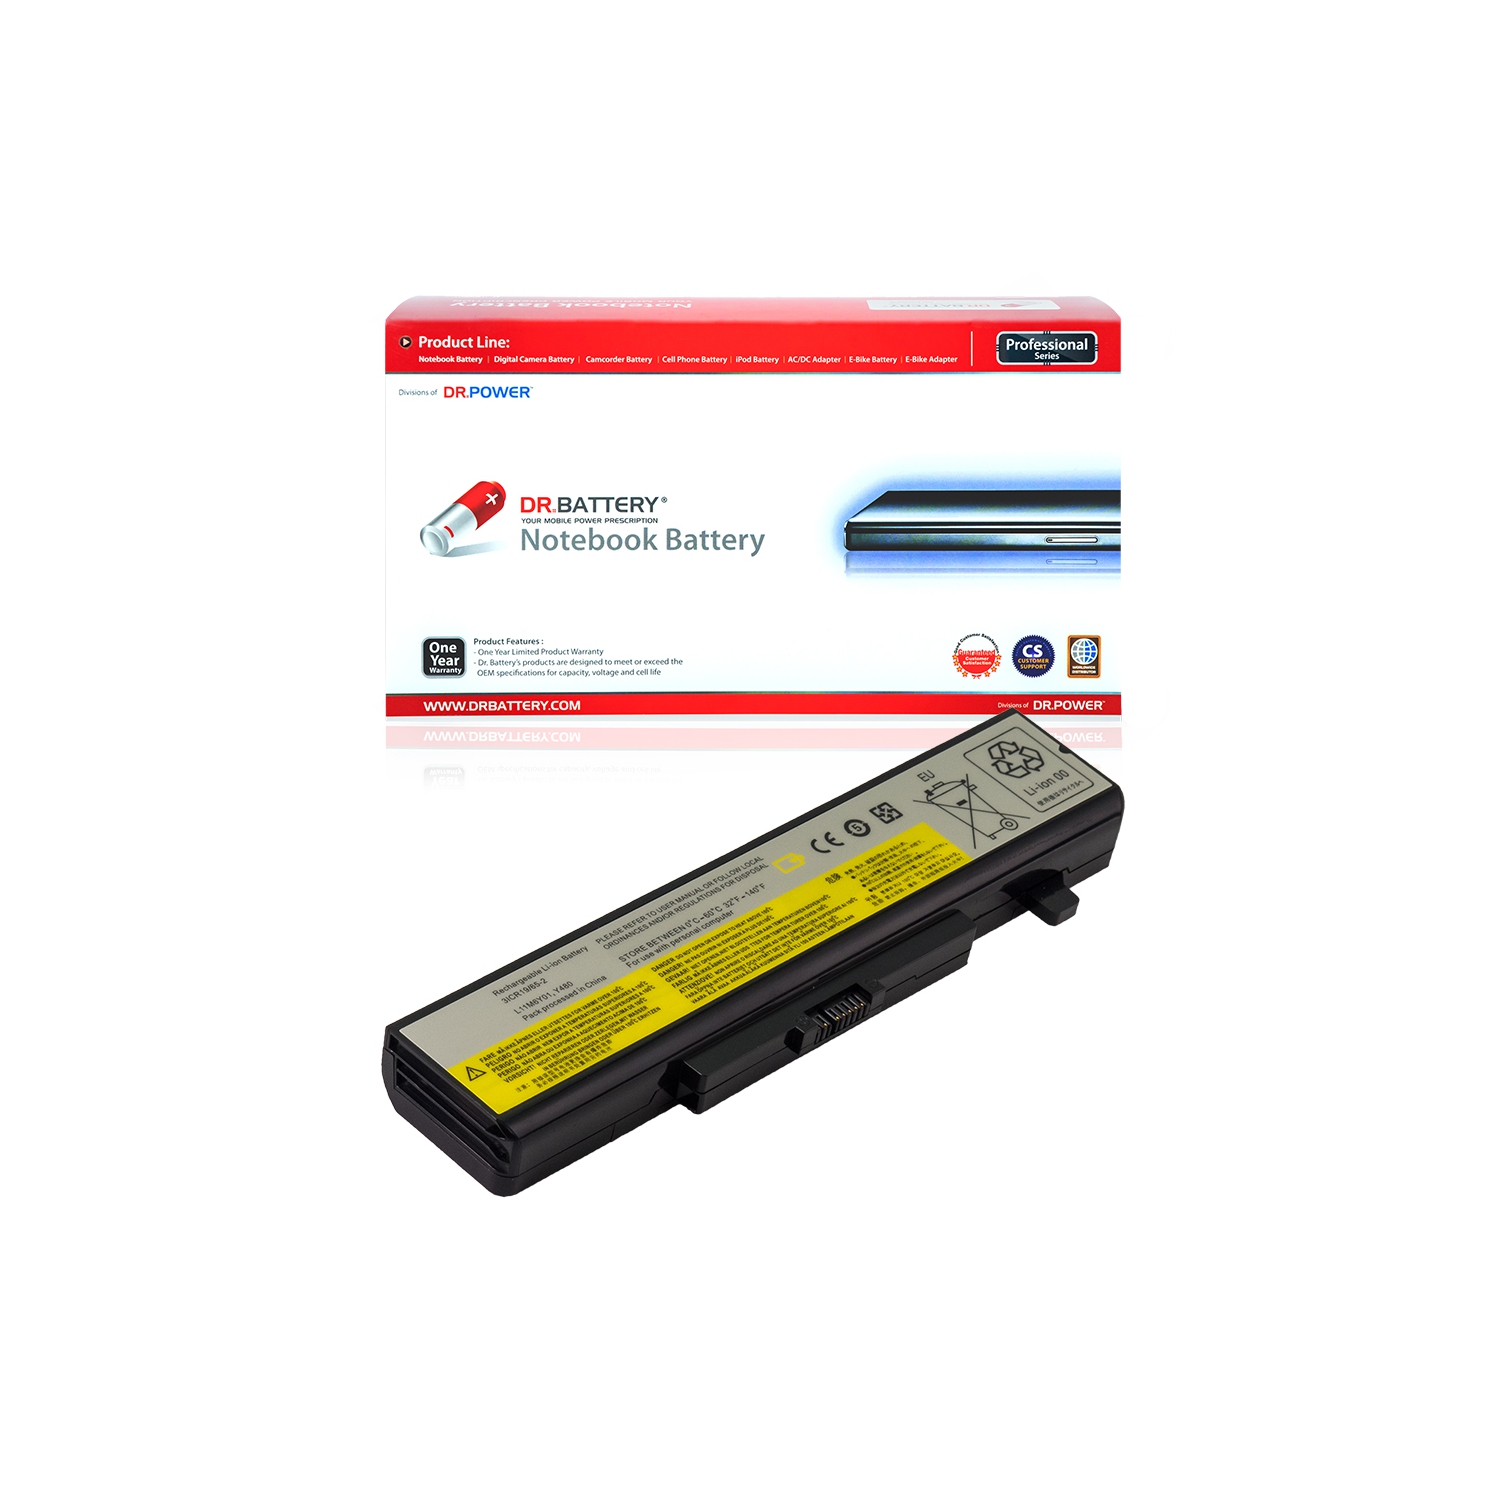 DR. BATTERY - Replacement for Lenovo B590 Bolt IV / G480 / G485 / G580 / G585 / L11L6Y01 / L11M6F01 / L11M6Y01 / L11N6R01